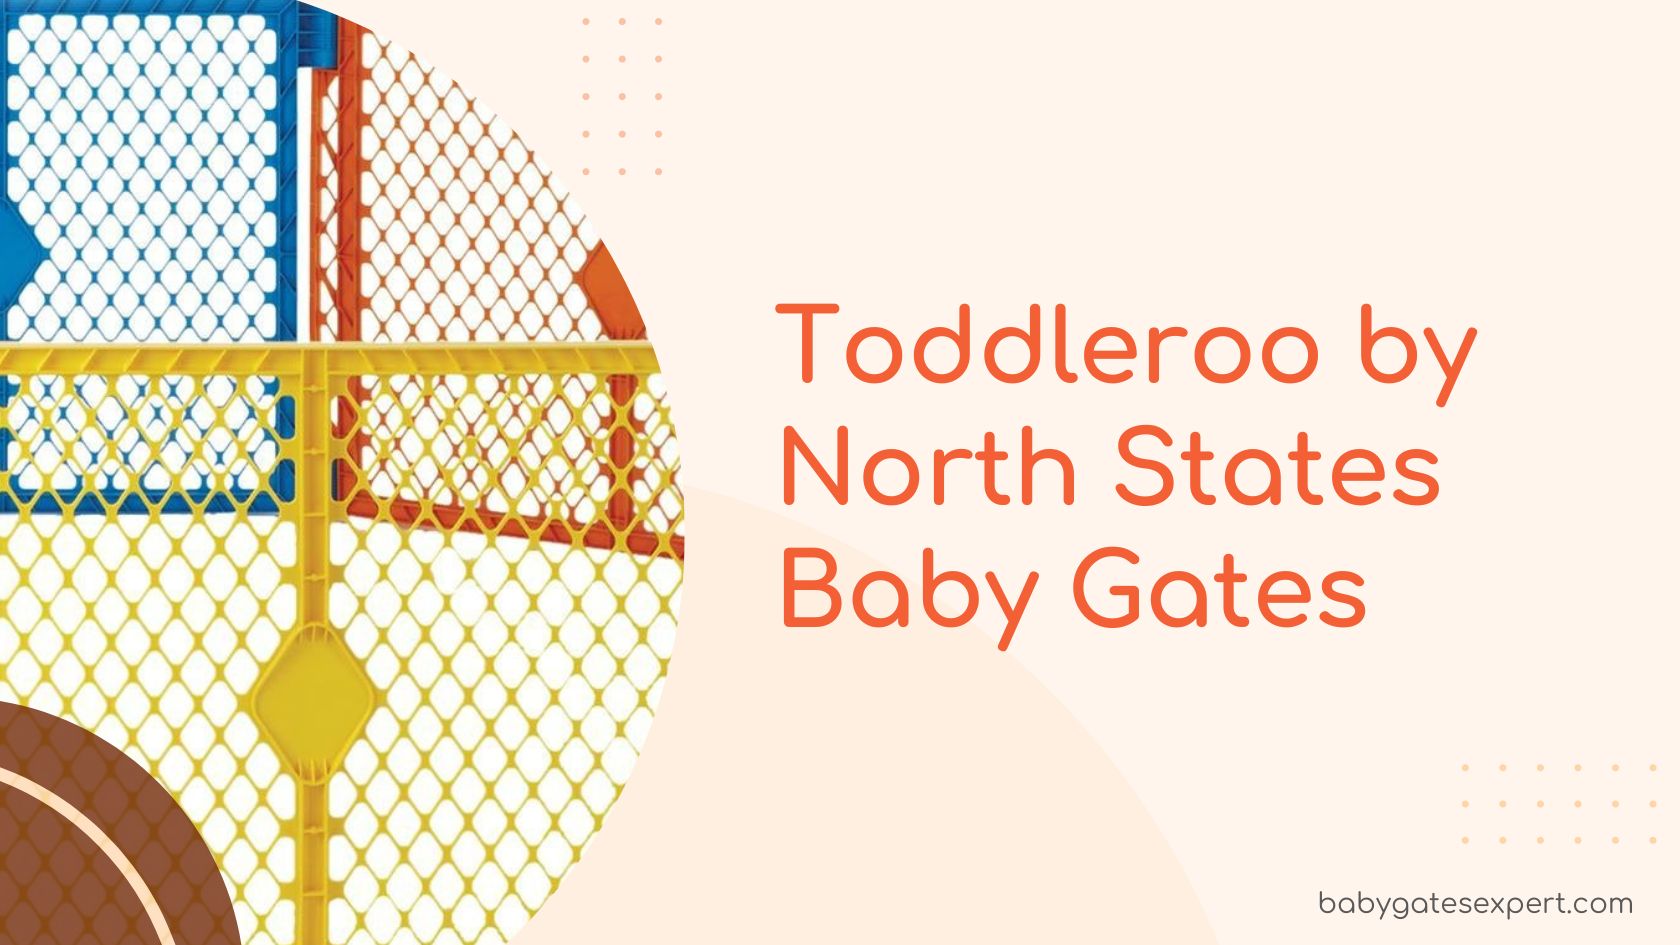 Toddleroo by North States Baby Gates